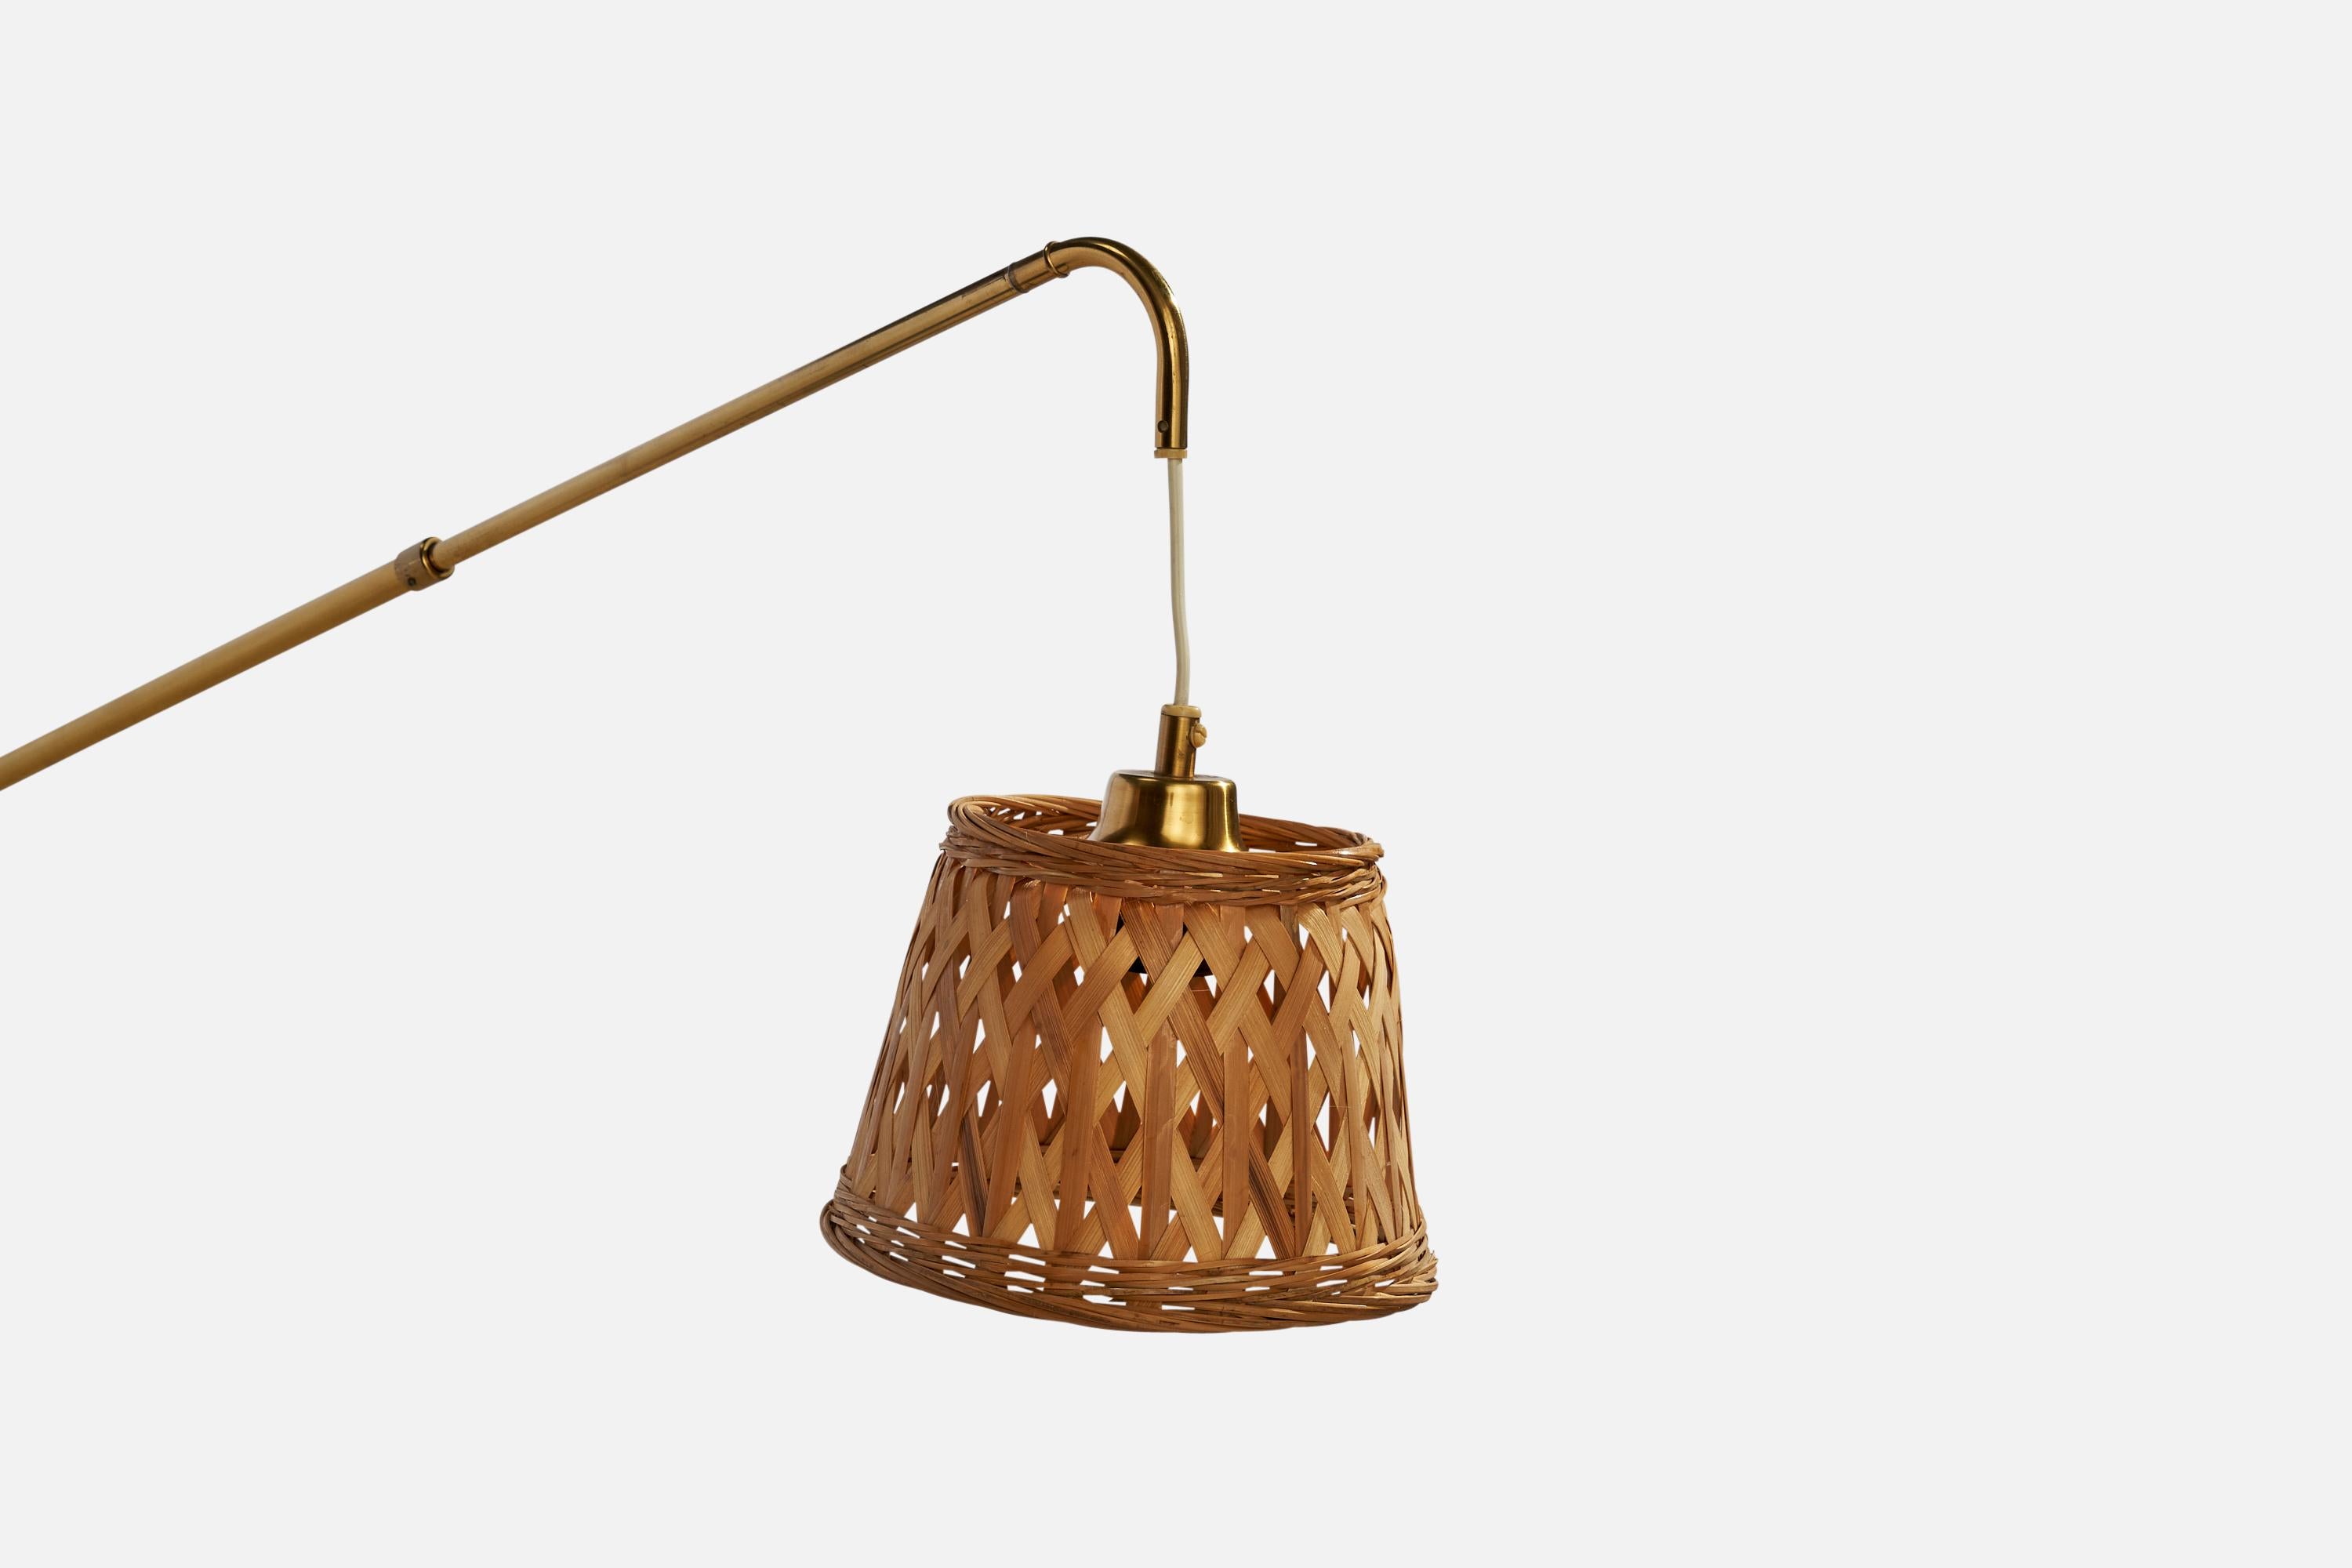 Möllers Armatur Elektriska, Wall Light, Brass, Rattan, Sweden, 1940s In Good Condition For Sale In High Point, NC